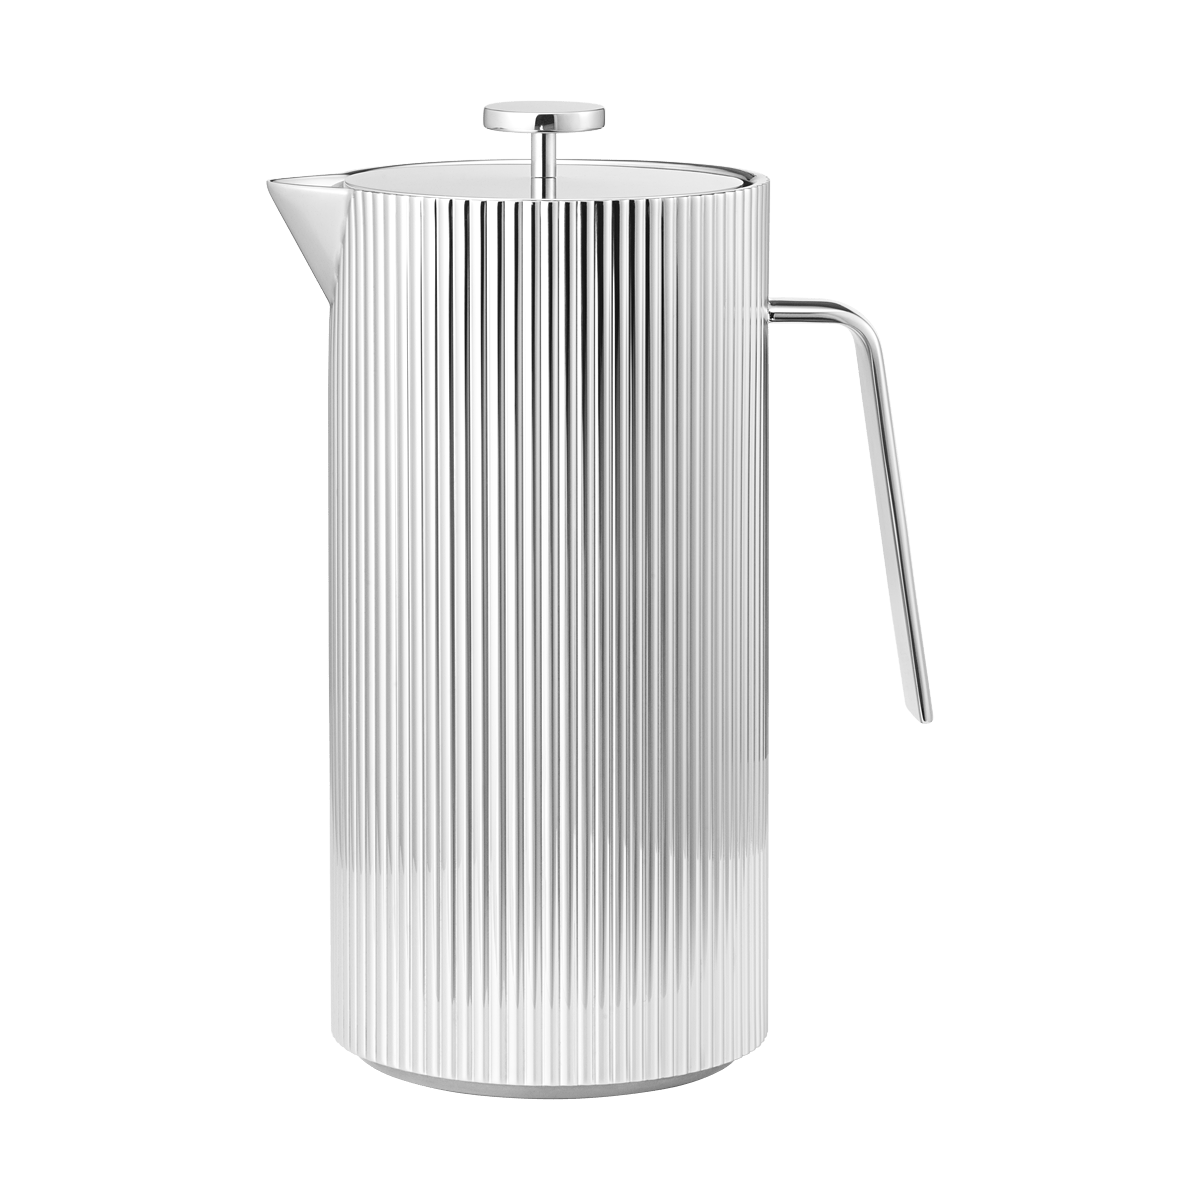 steel stainless BERNADOTTE coffee press in French